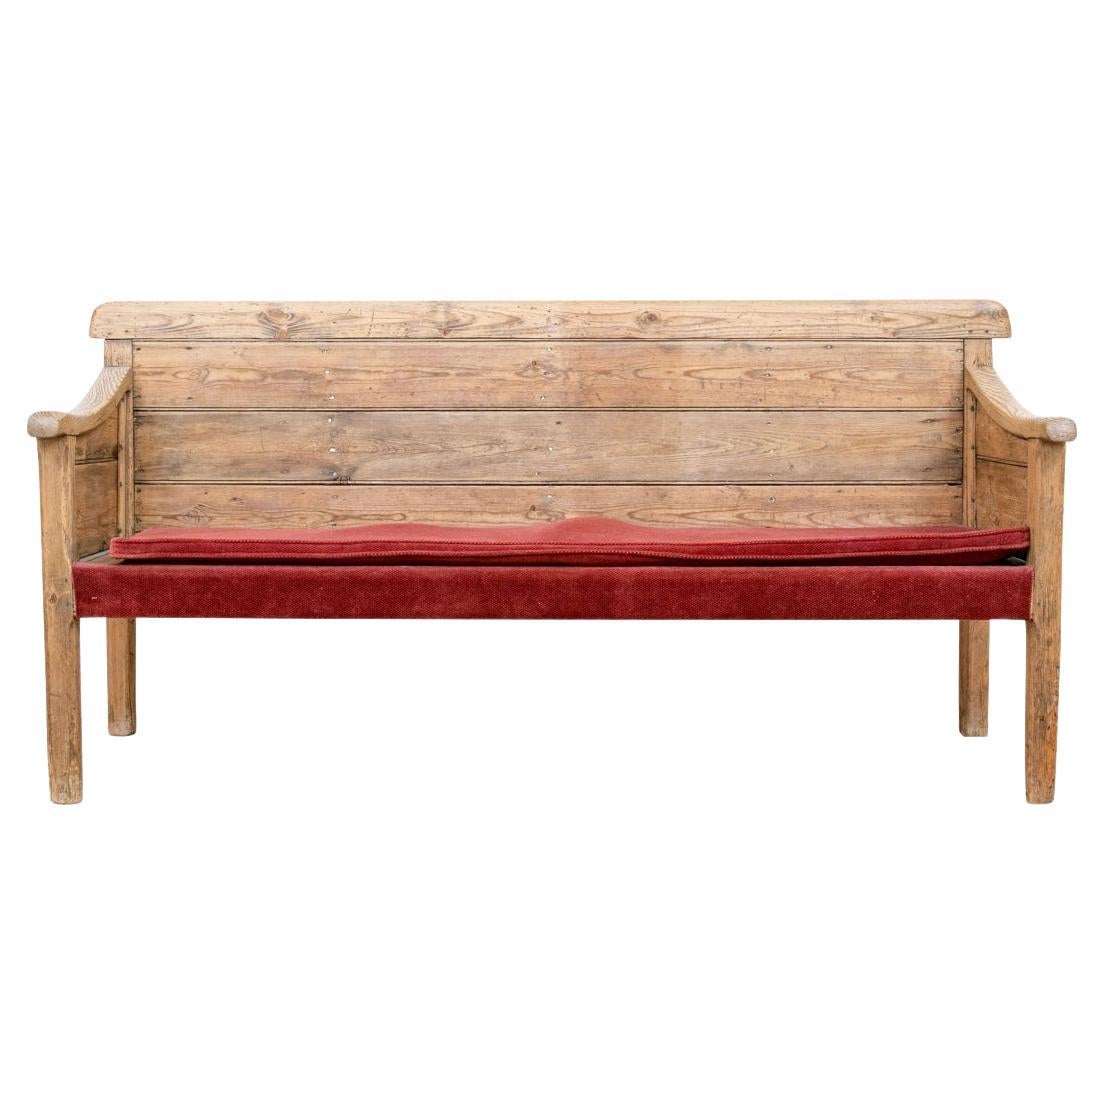 Pine Bench From Antique Wood in Rustic Style  For Sale